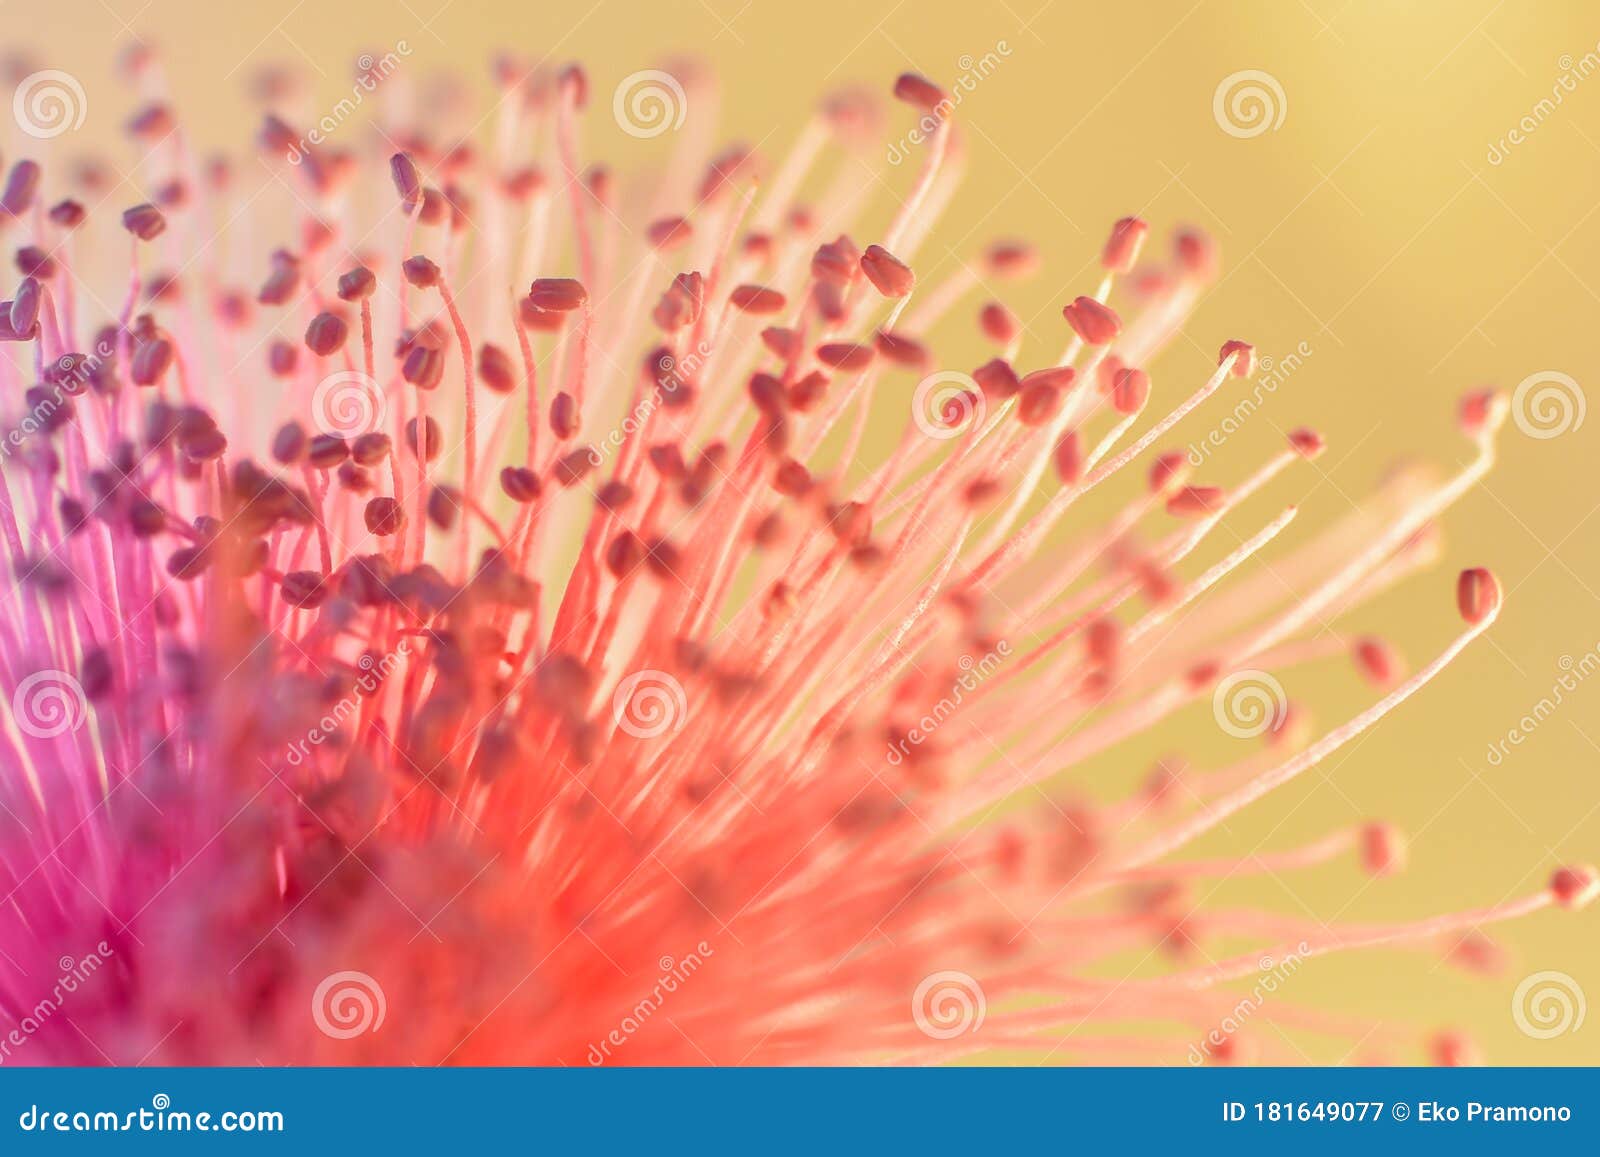 Beautiful Flower Dandelion In Macro Closeup With Bokeh Background Hd Image And Large Resolution Can Be Used As Desktop Wallpape Stock Image Image Of Detail Dandelion 181649077